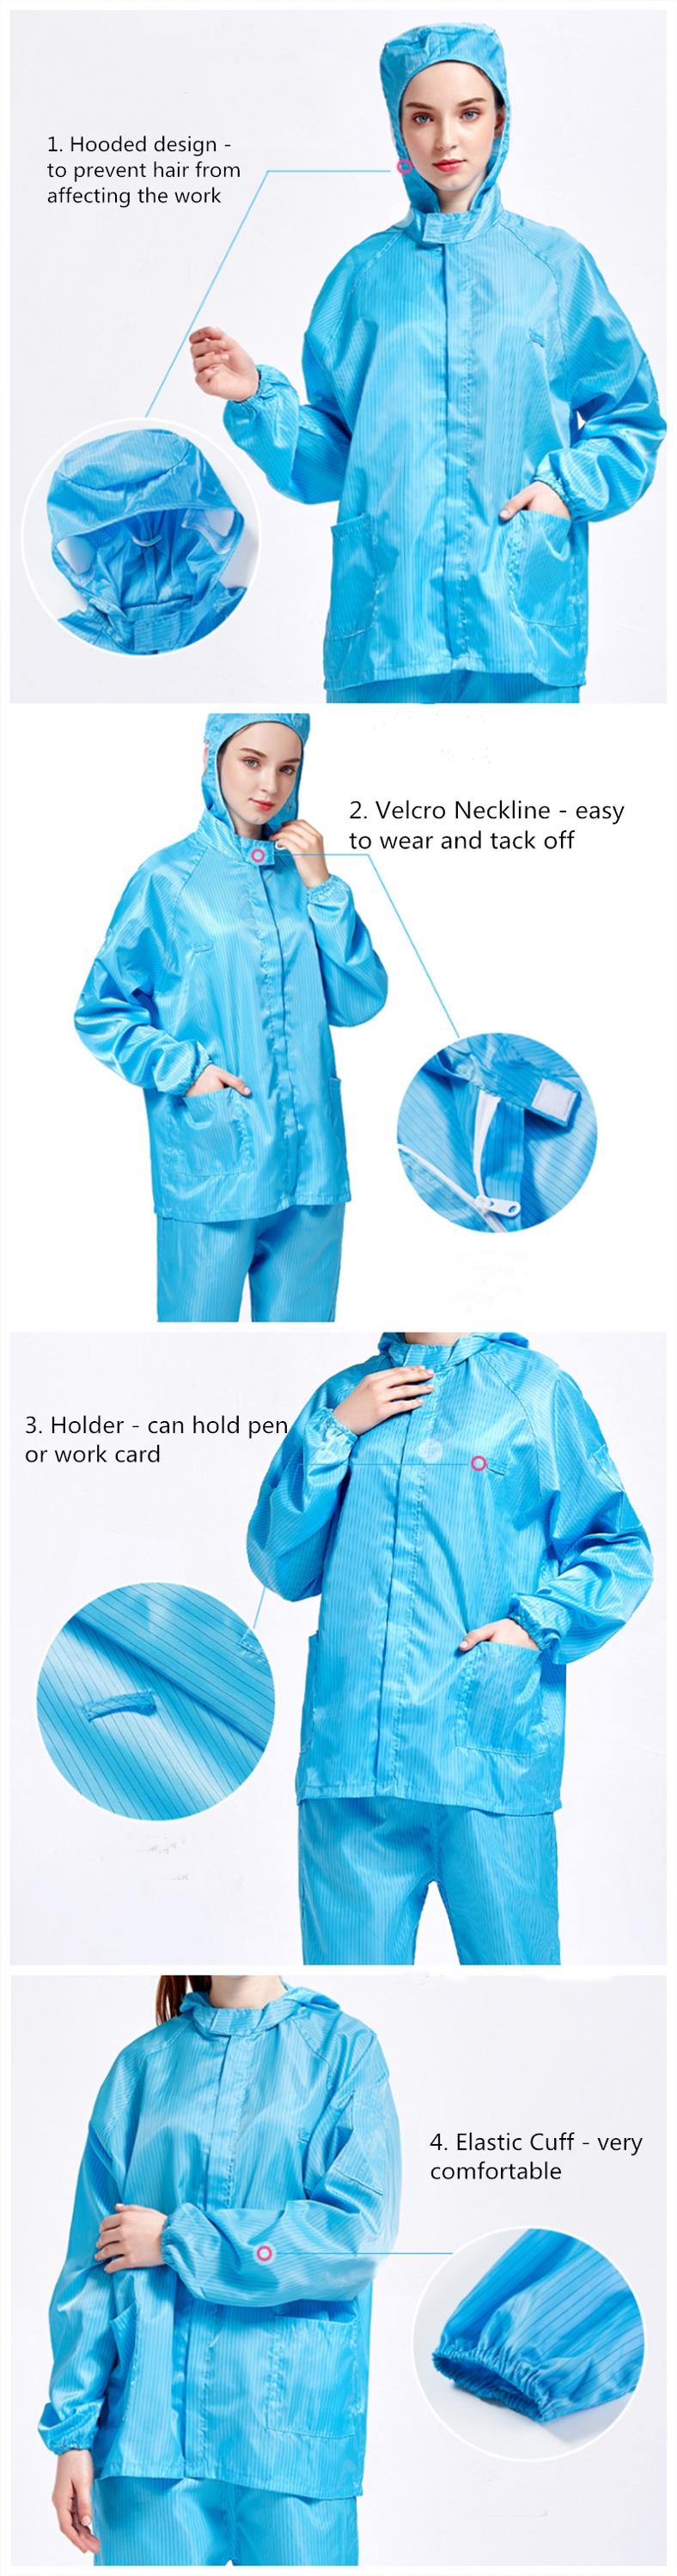 Antistat ESD Protection Clothing Antistatic Garment Cleanroom Suit